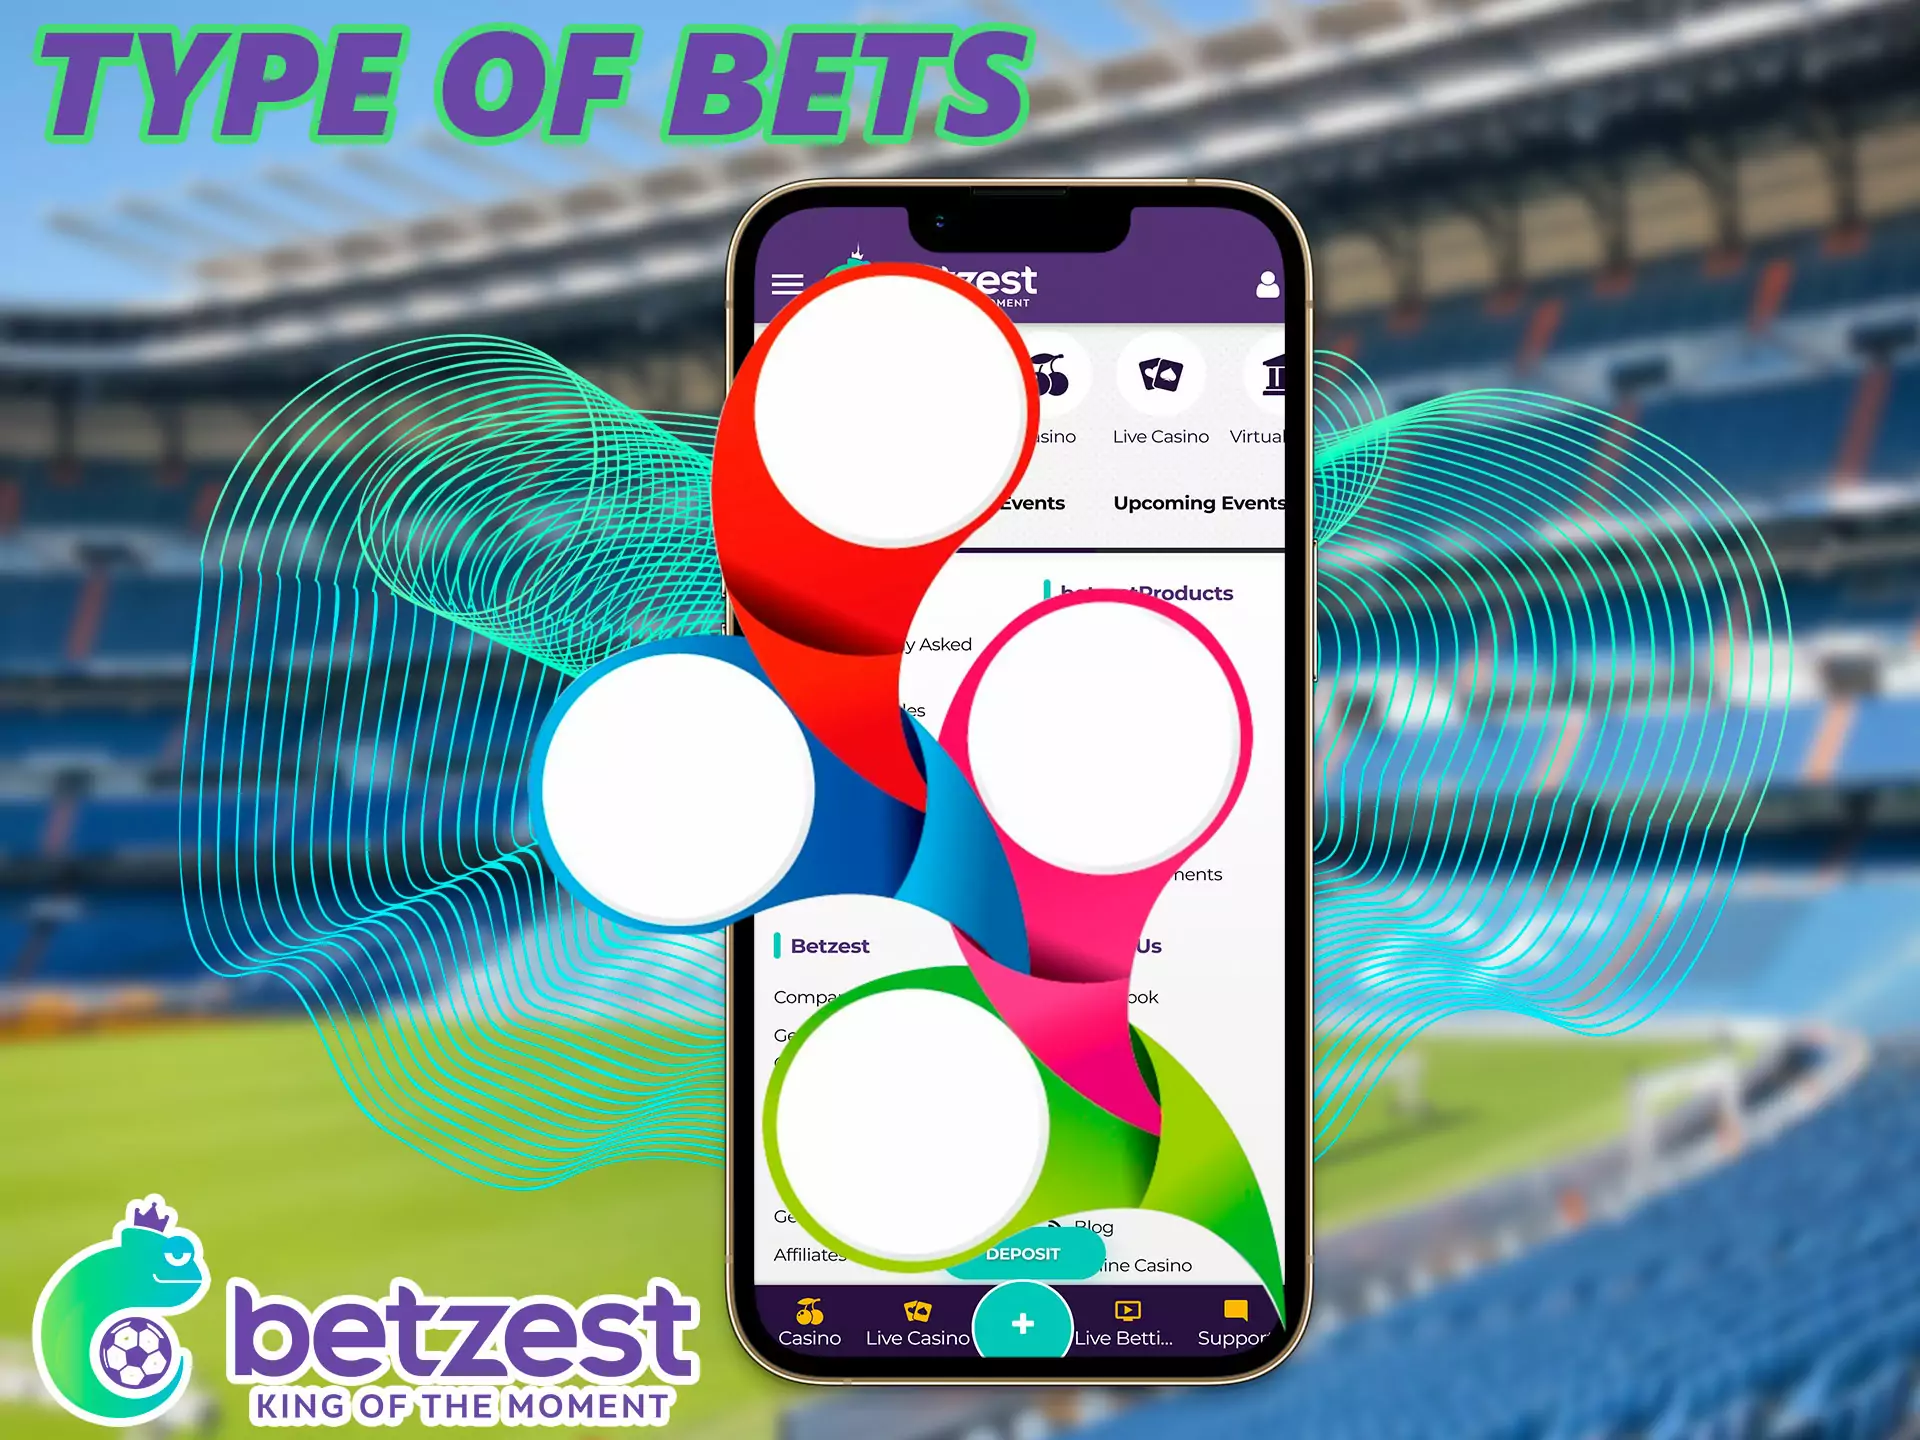 There are two methods for placing bets, here everyone wears the one that suits them best.